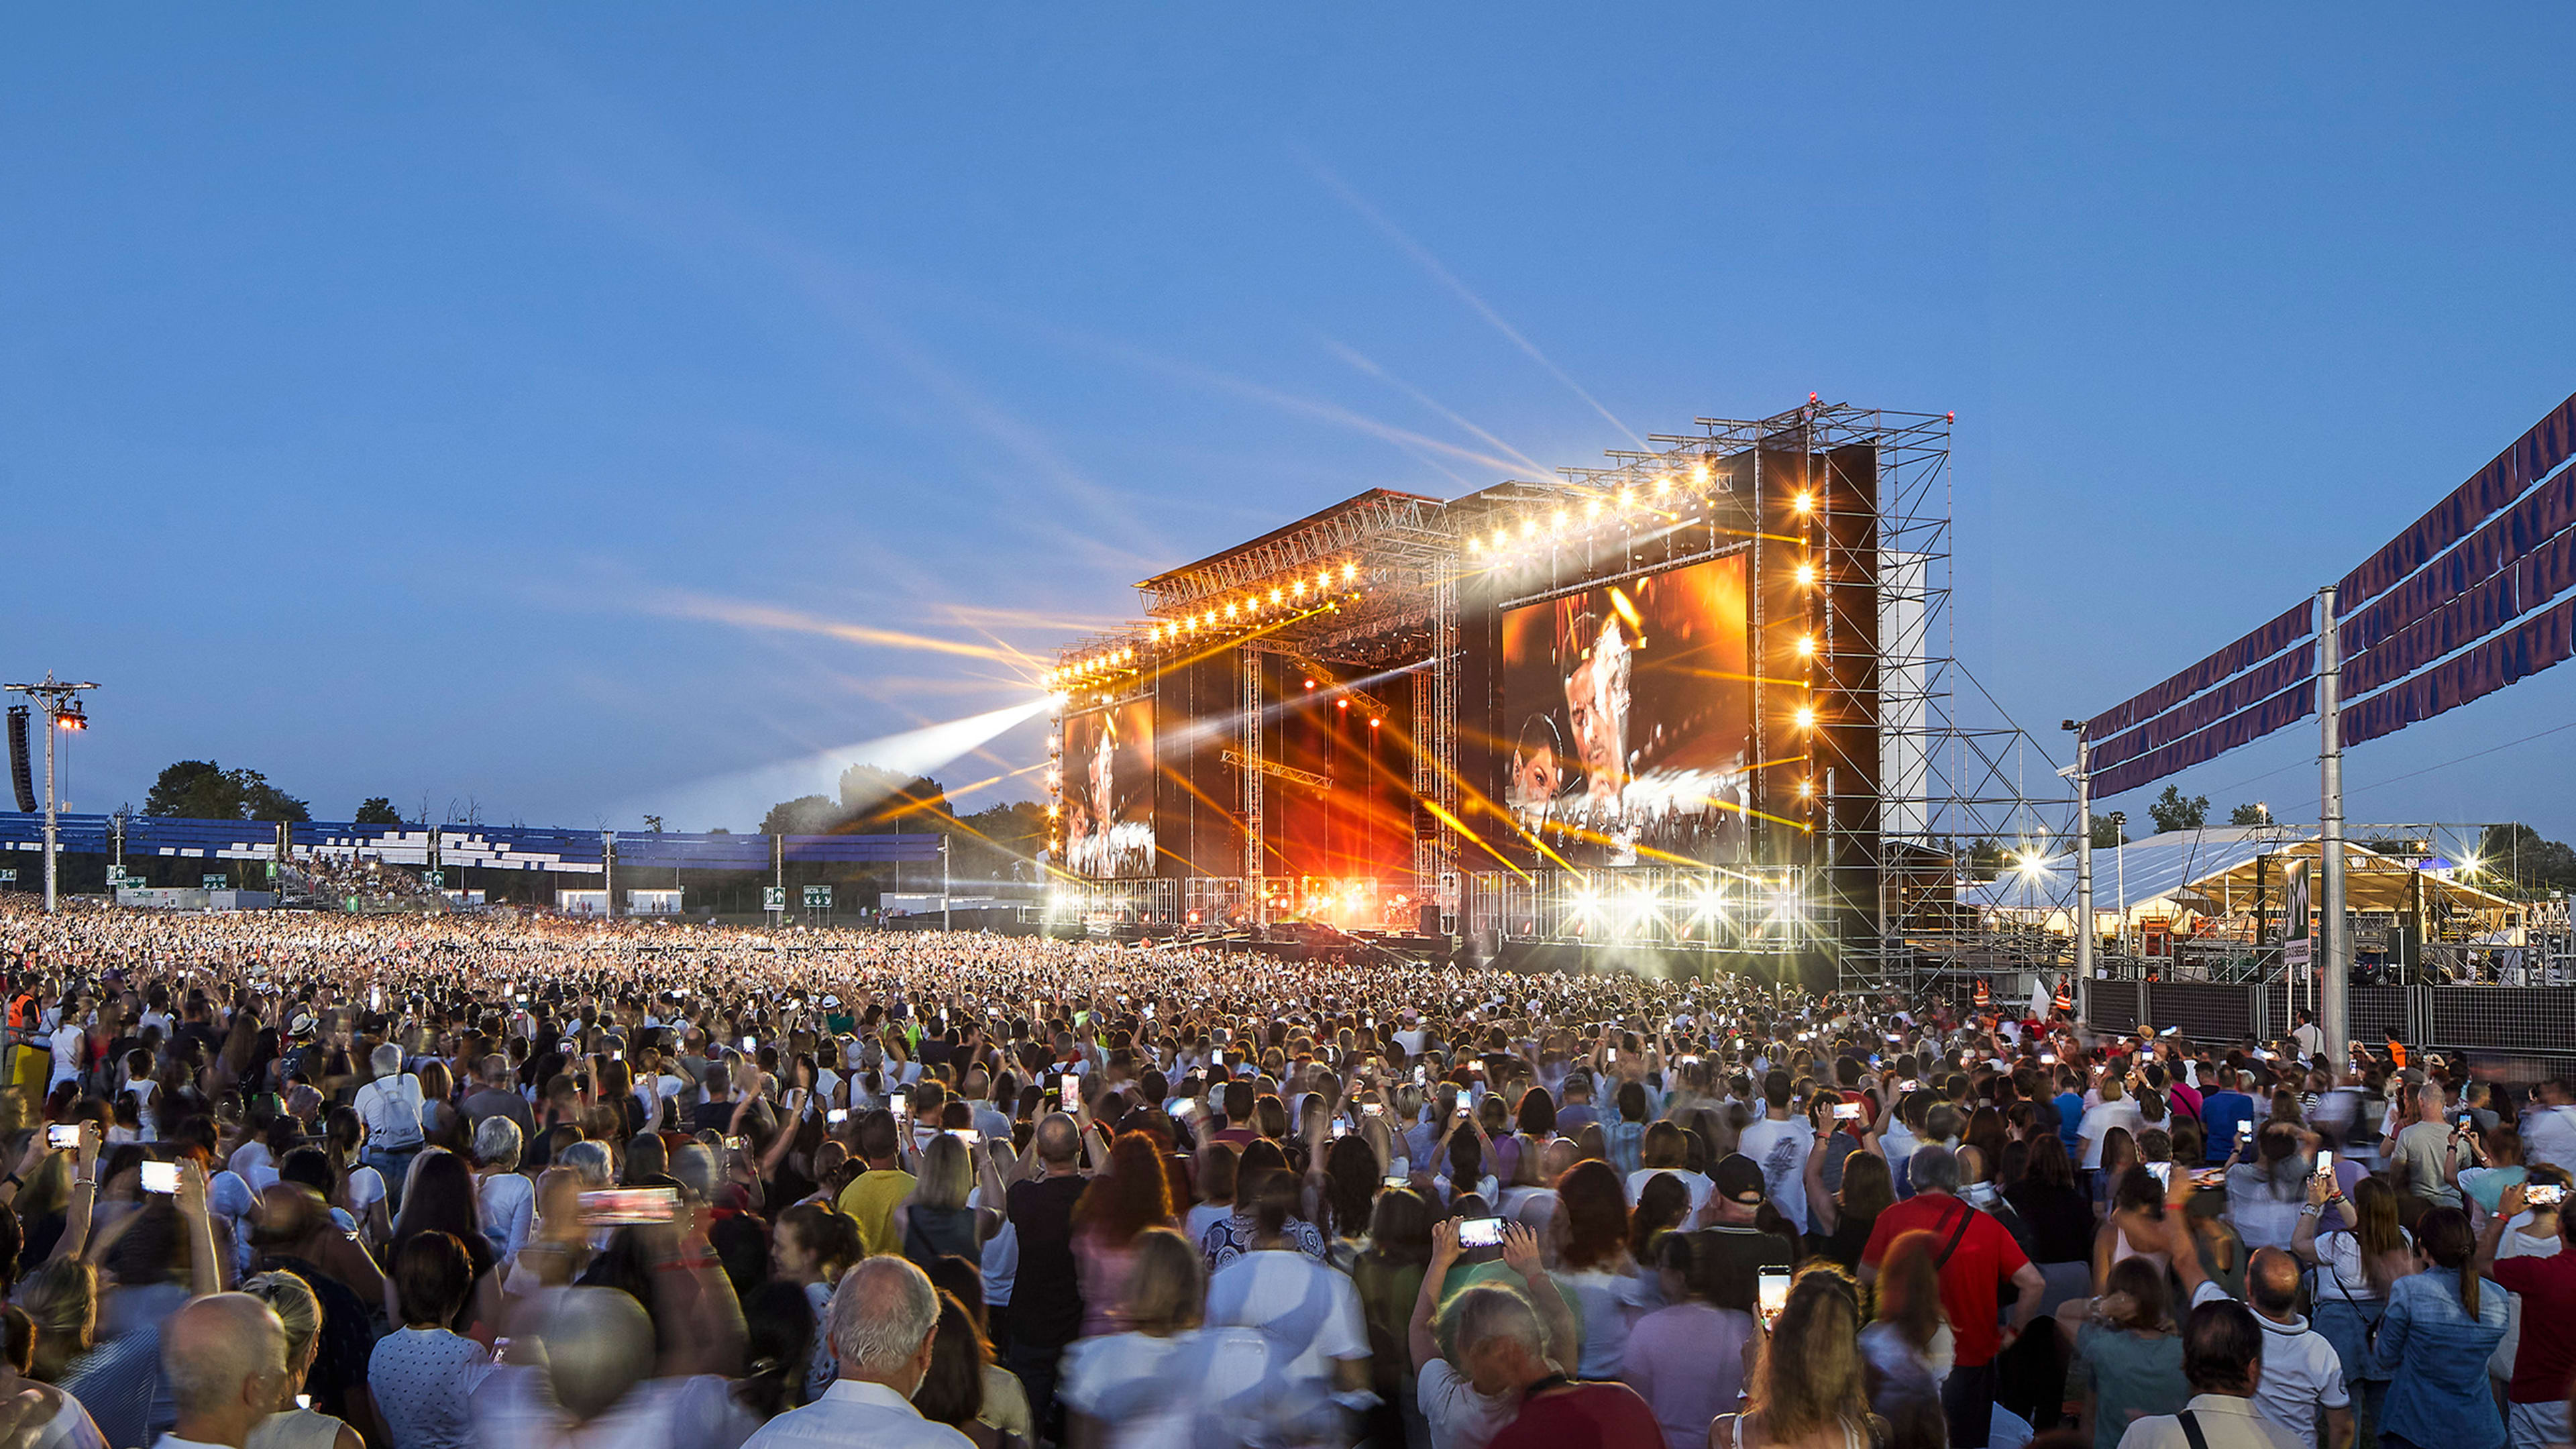 This small airport in Italy is now a major concert venue